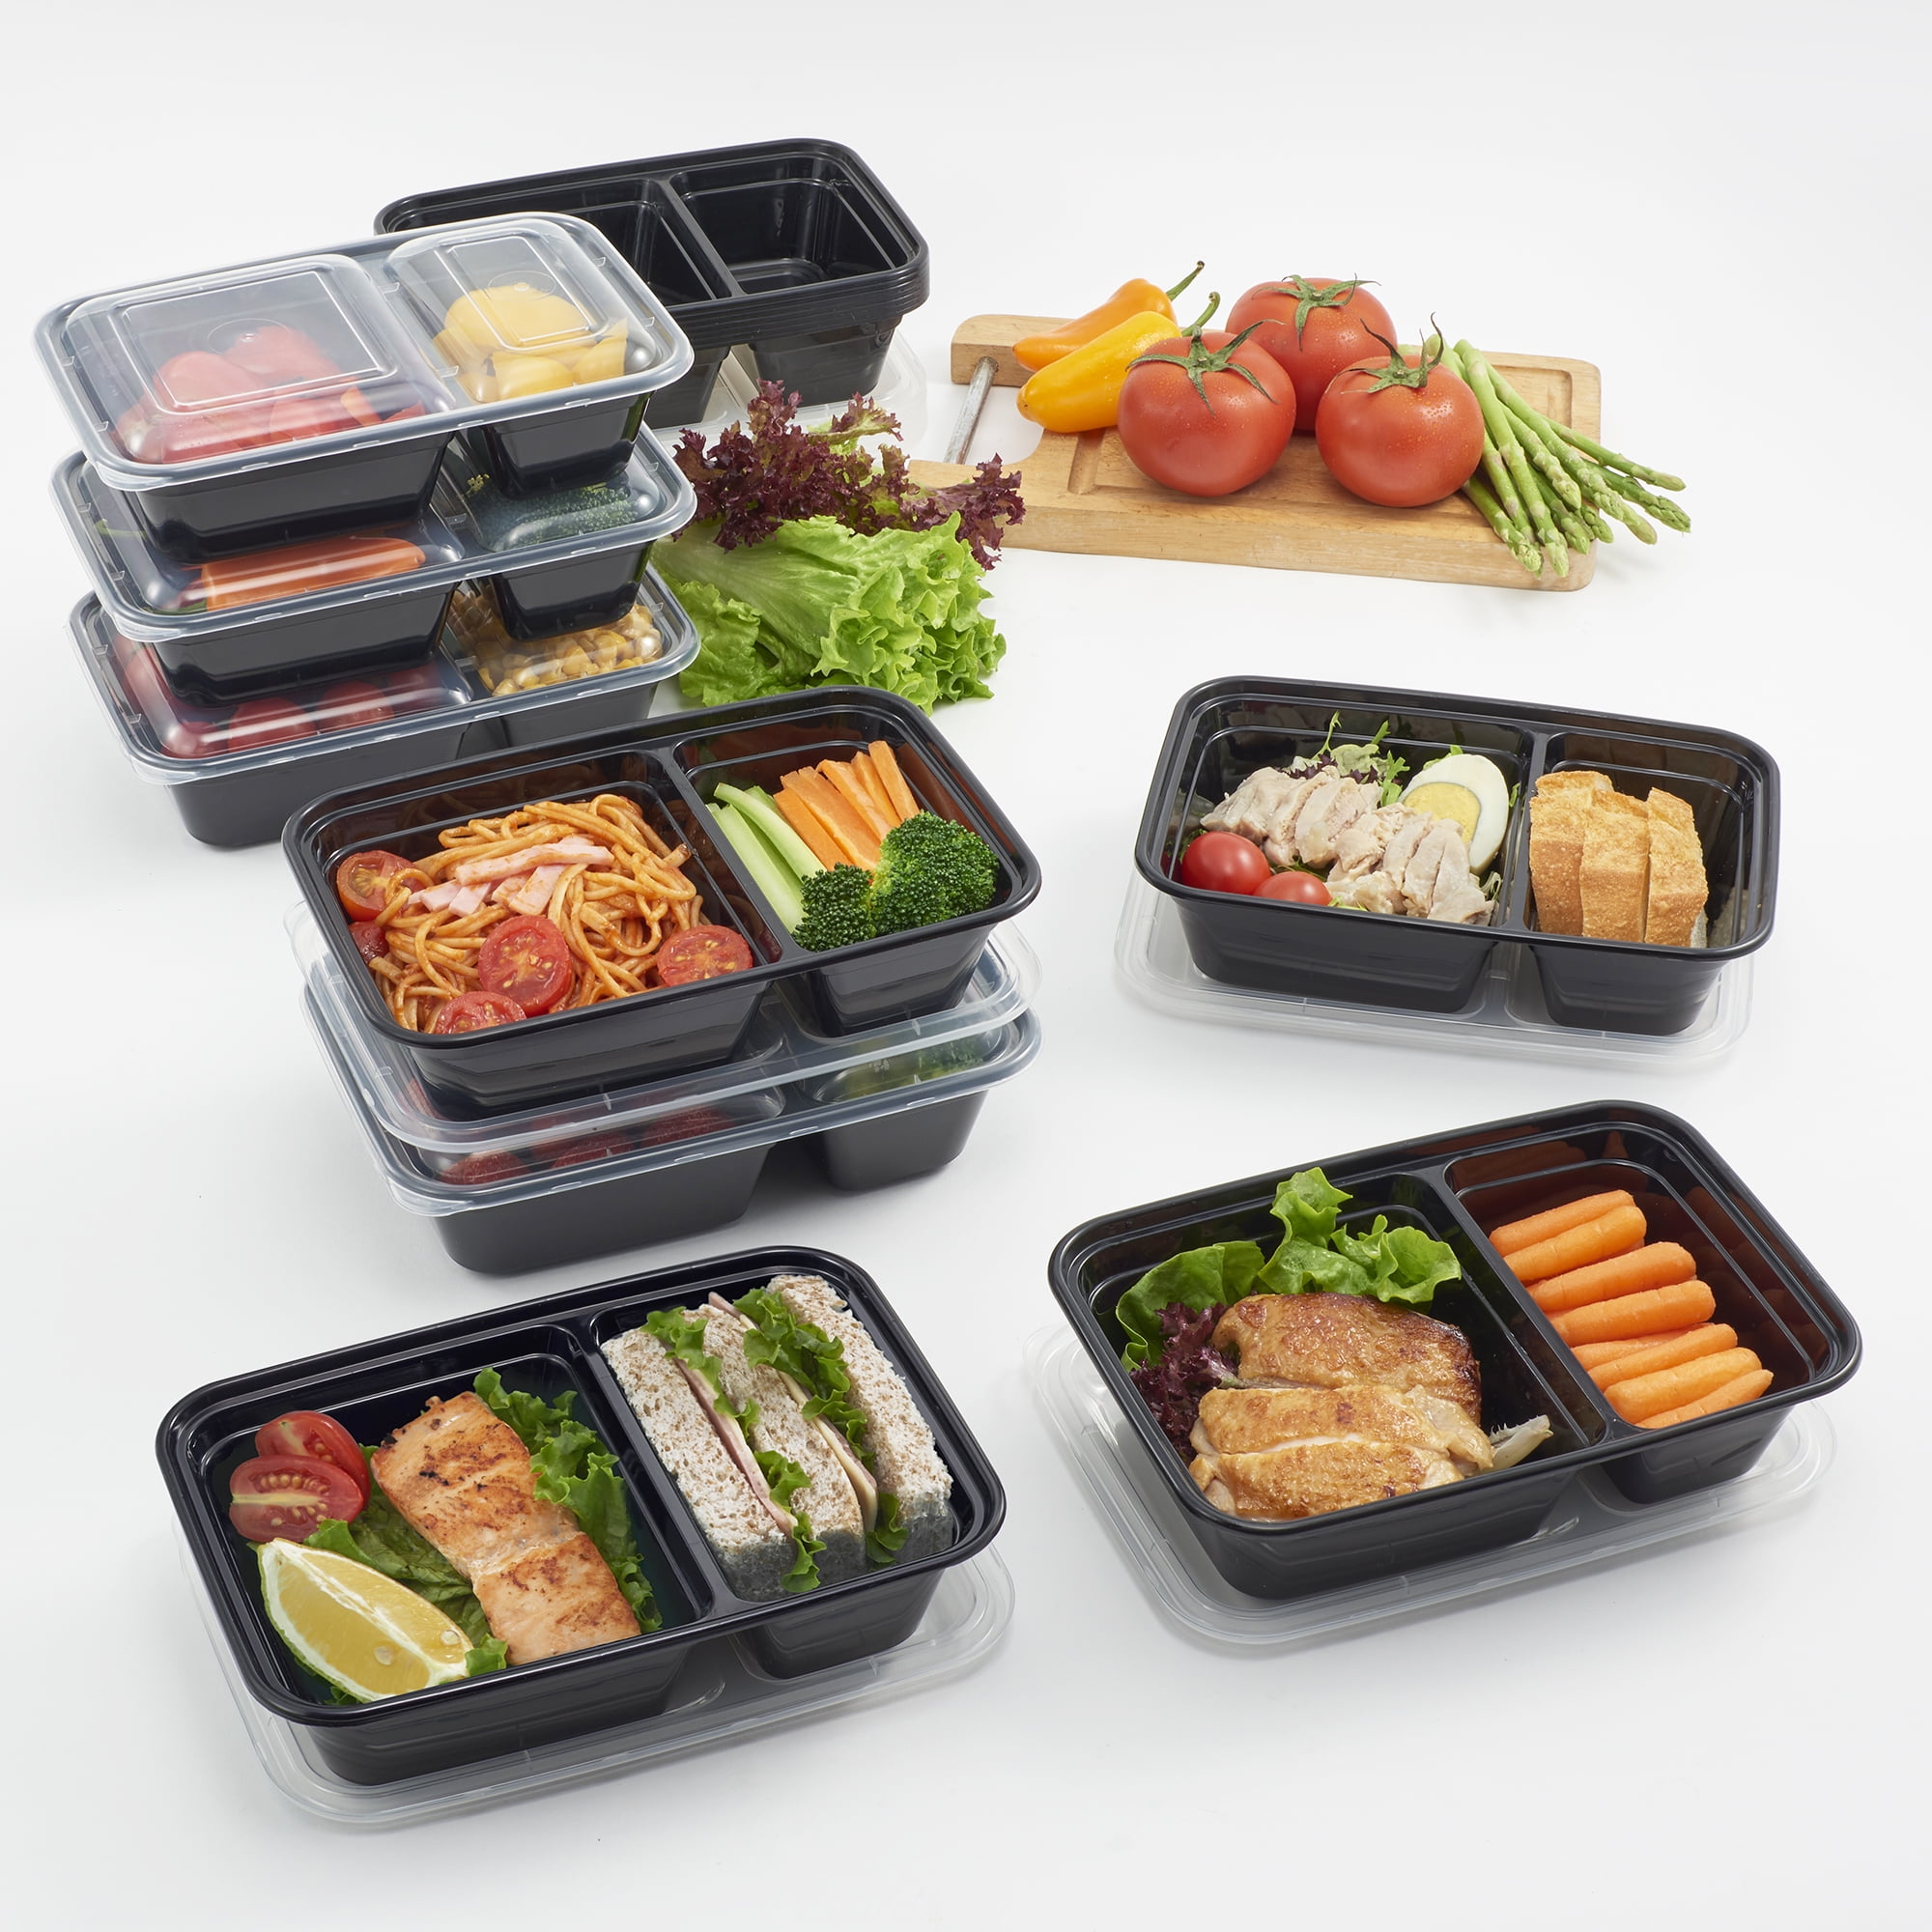 Mainstays 30 Piece 2 Compartment Meal Prep Food Storage